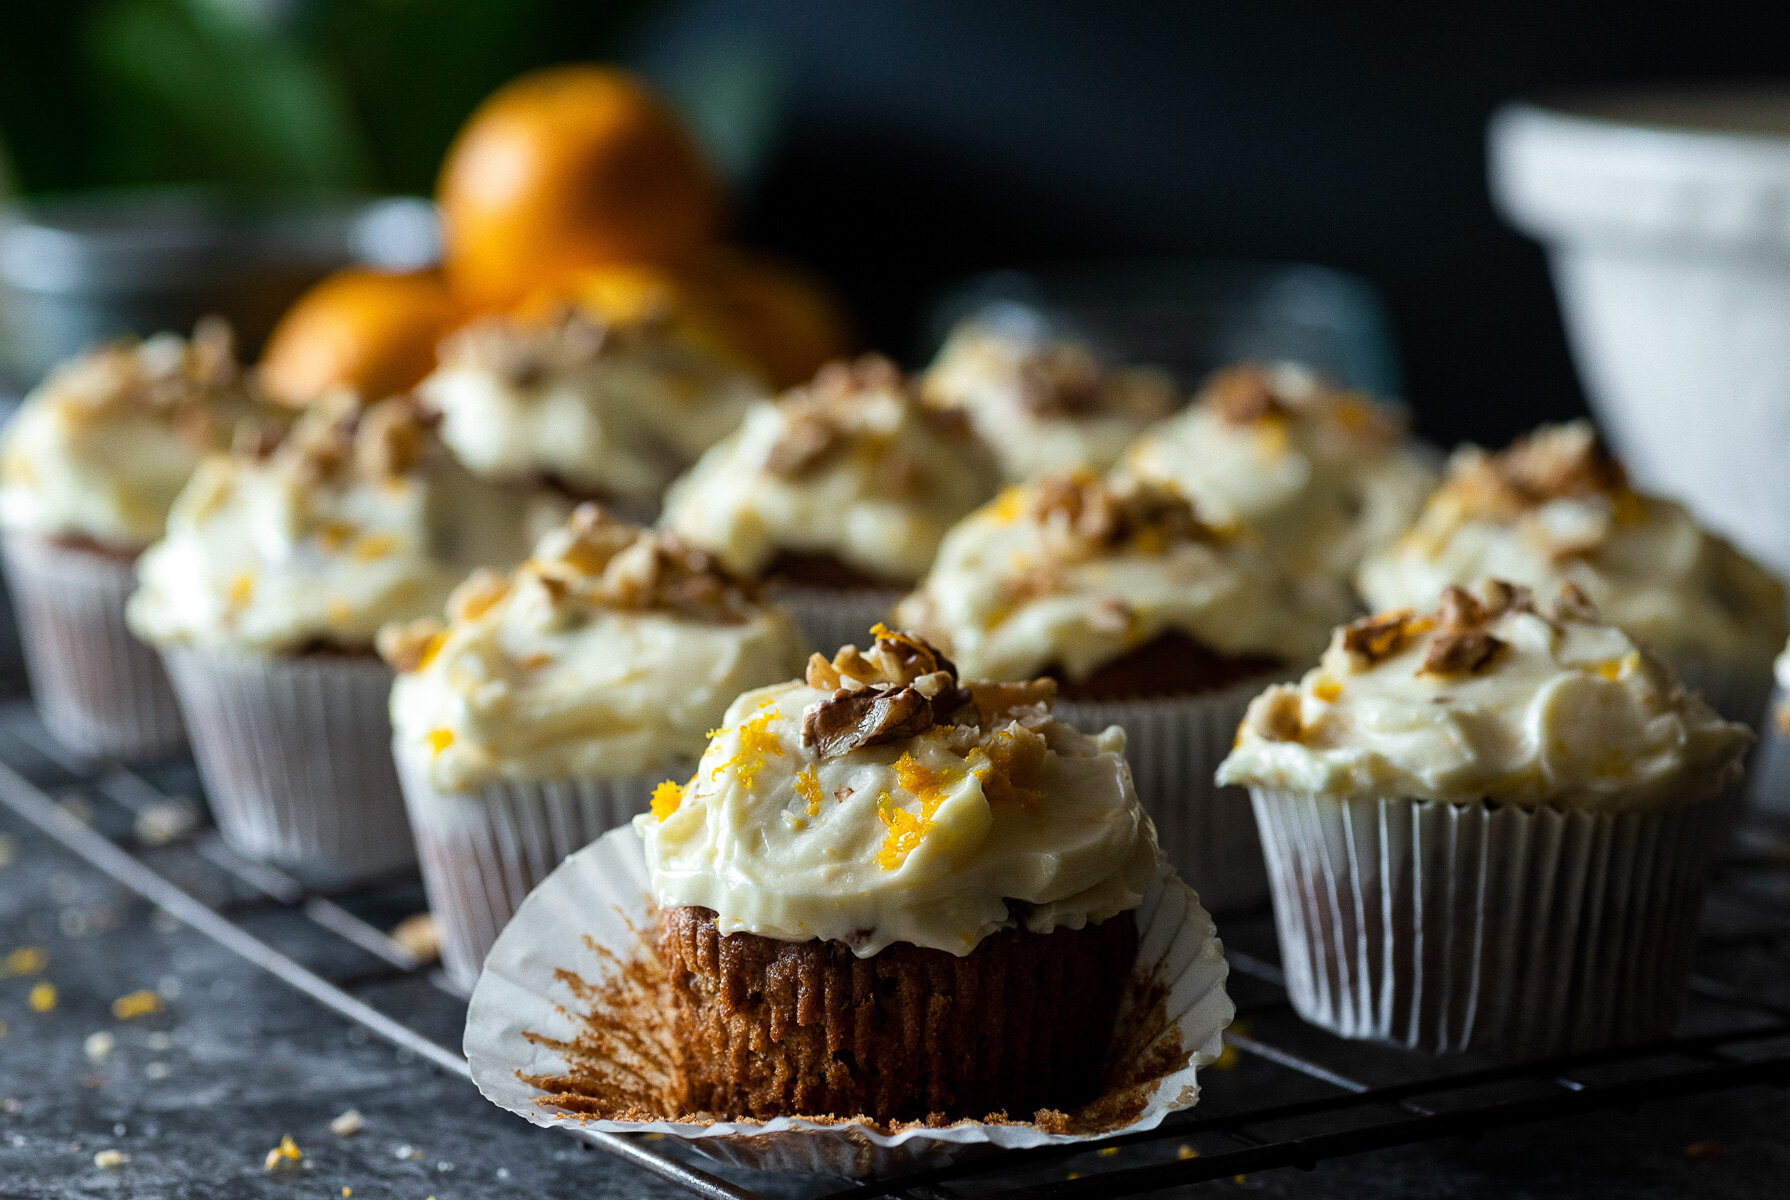 Thackerys Cookery School - Hikaru Funnell - Carrot Cake Muffins - Matte Boards - Food Photography - 7-7-2020 - 23.jpg